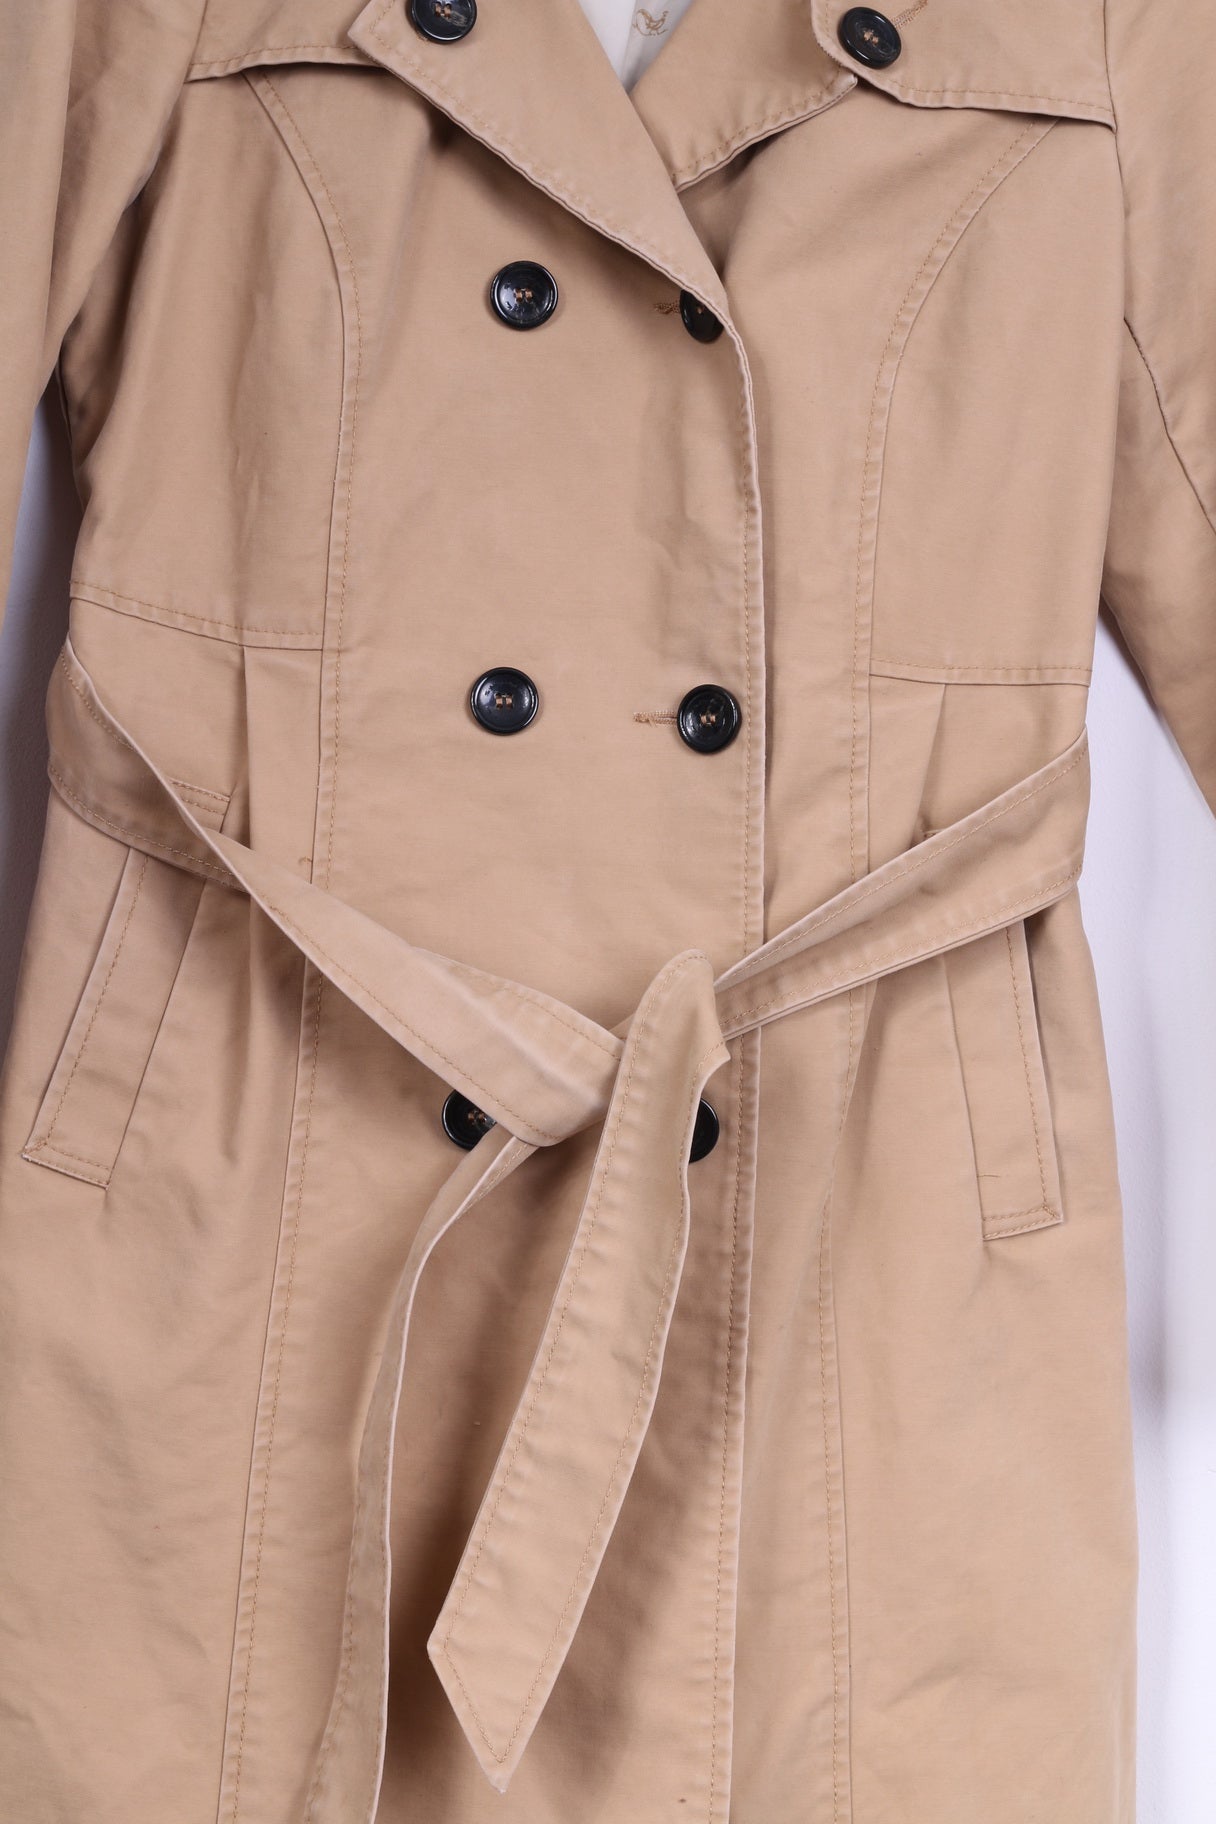 Holly White by Lindex Womens 42 M Trench Coat Beige Cotton Belted Classic Mac